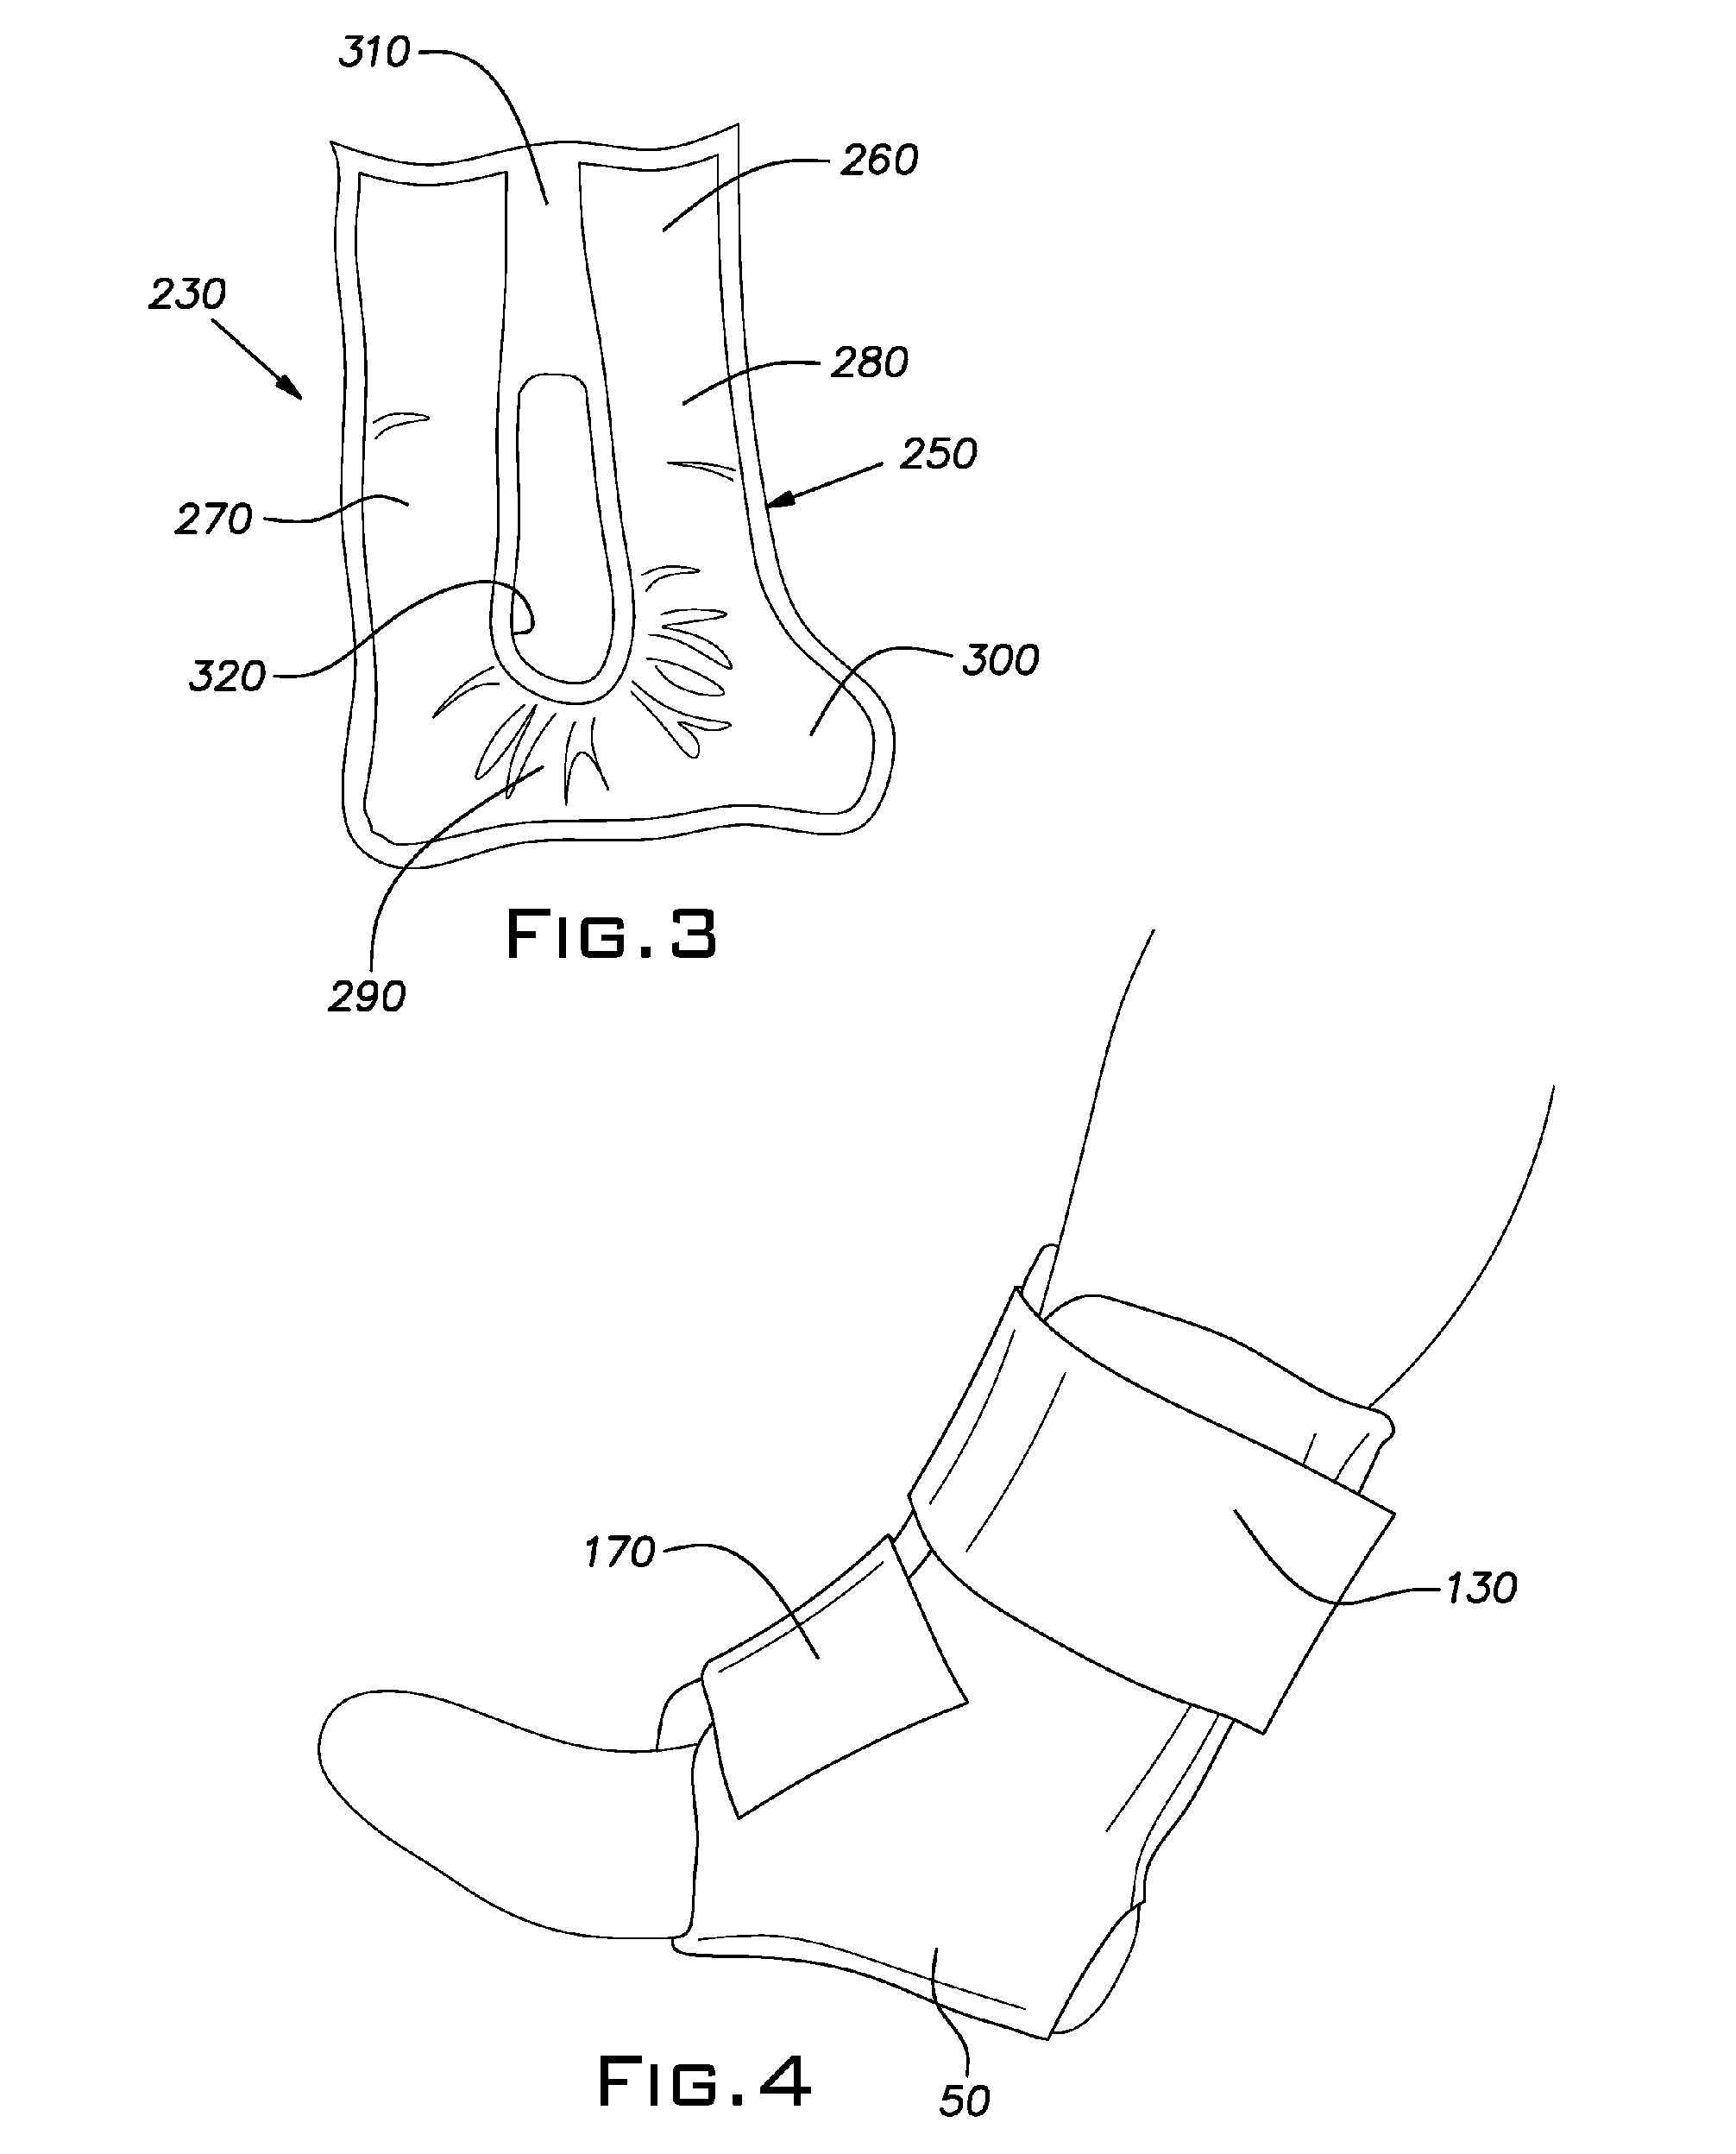 Device for administering cold therapy to ankles